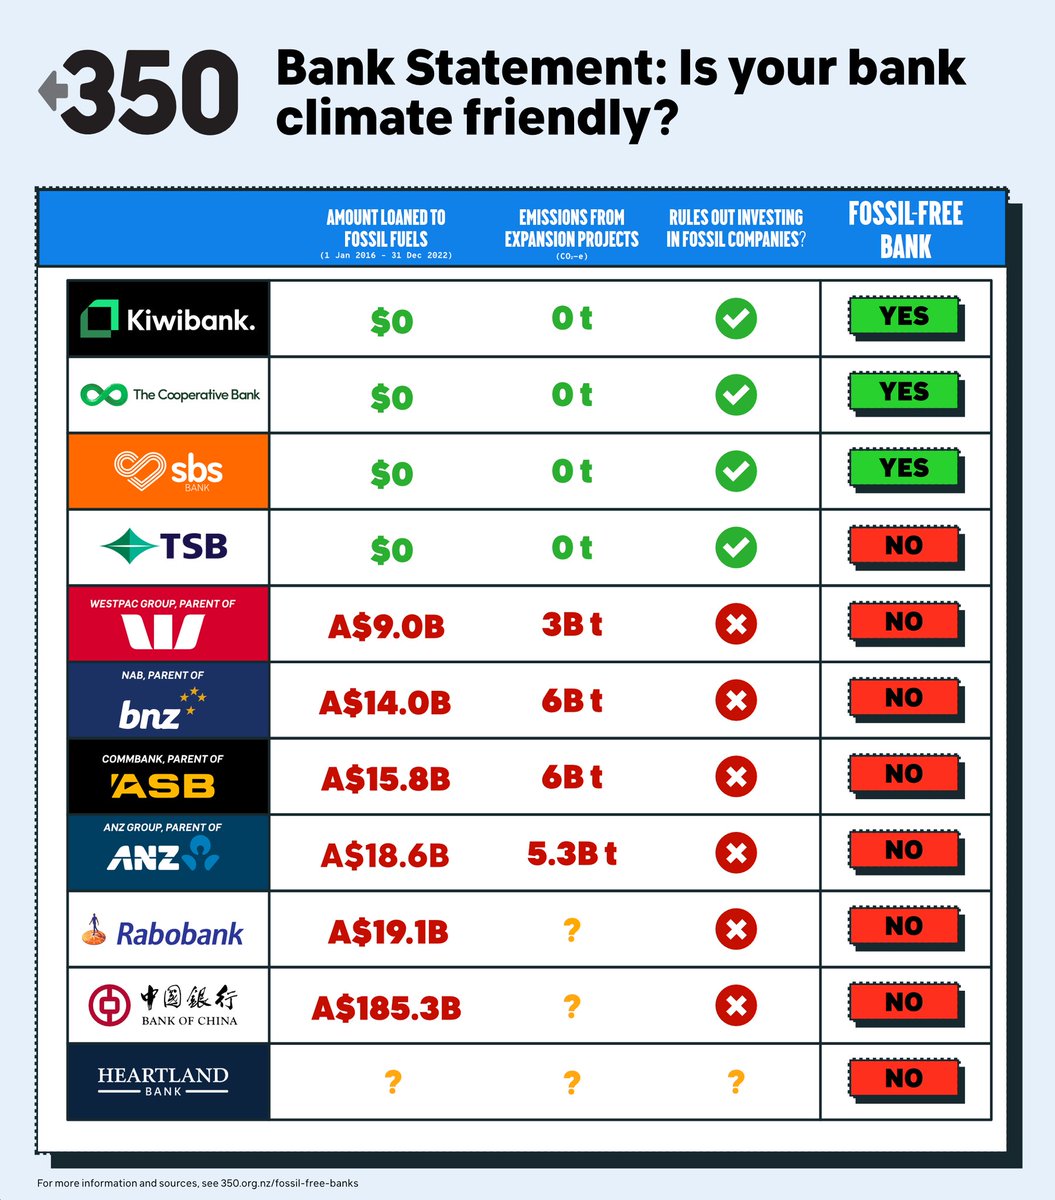 .The government’s fast-track consenting bill is threatening fossil fuel extraction in nz - but climate criminals can’t dig for fossil fuels without bank finance to do so. This is why it is so crucial that we push our banks to go fossil-free. 350.org.nz/fossil-free-ba…